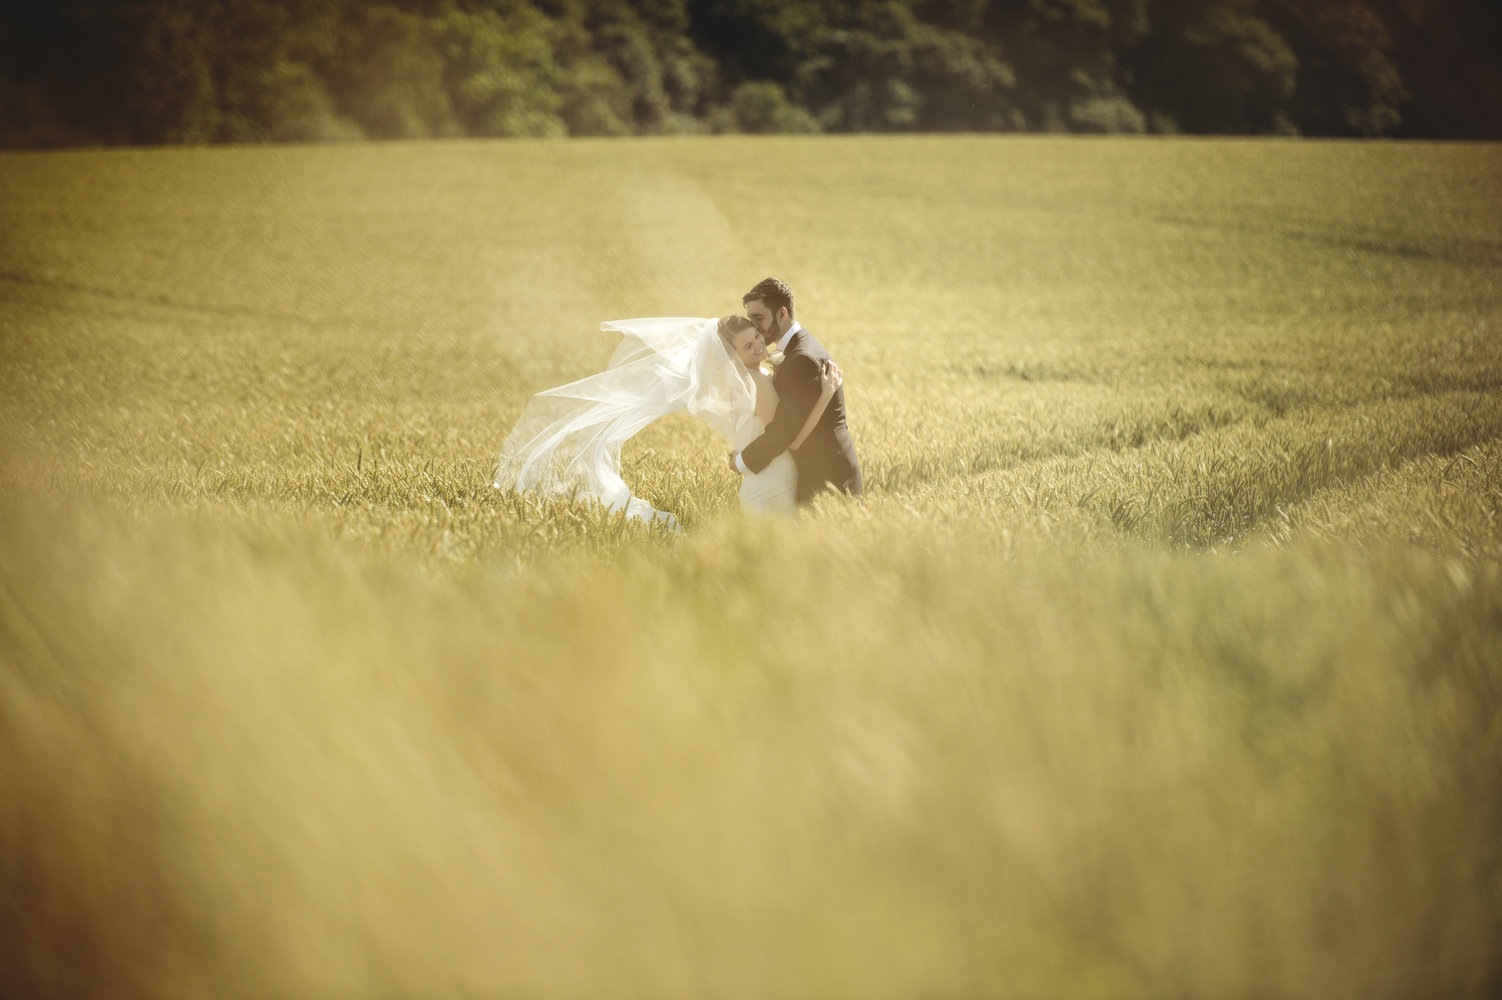 The Priory Cottages Wedding Photography Testimonial